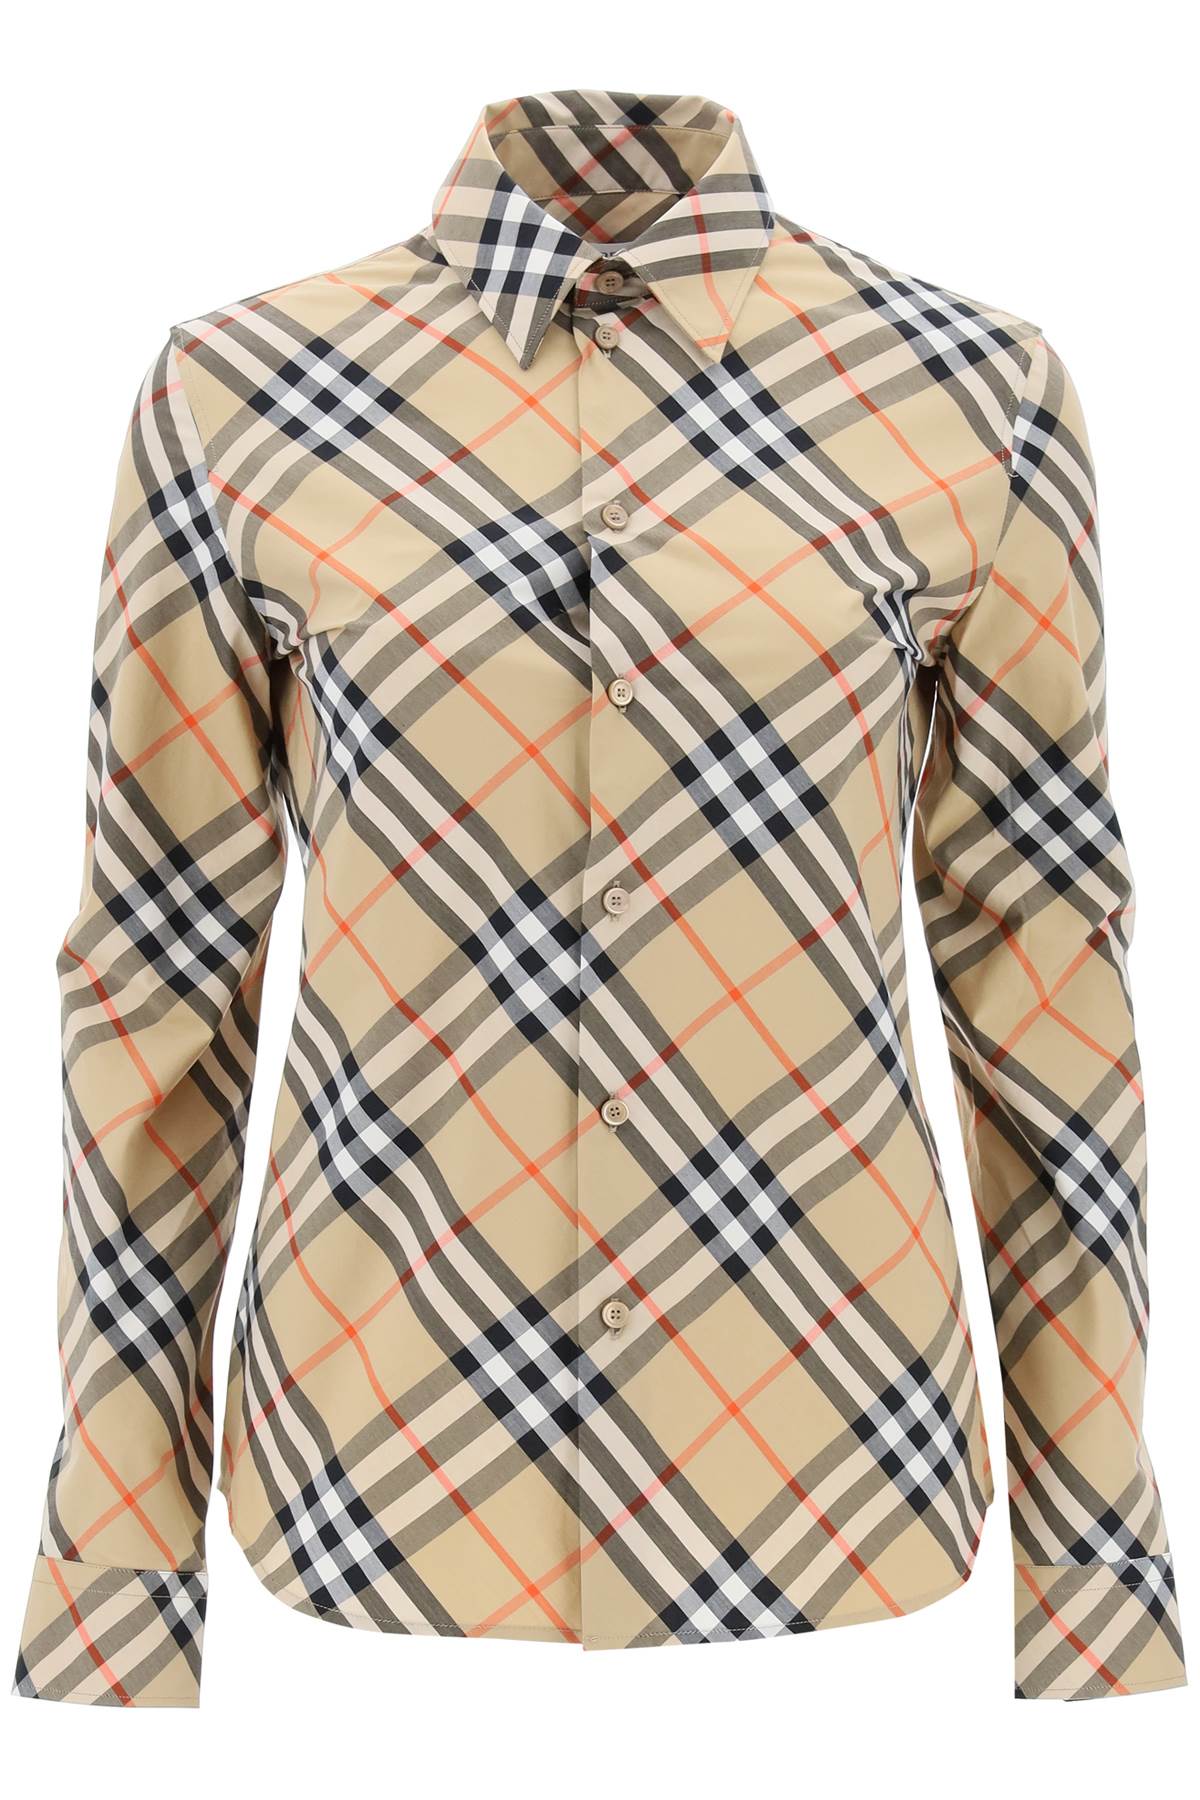 BURBERRY Women's Iconic Check Pattern Long-Sleeved Cotton Shirt